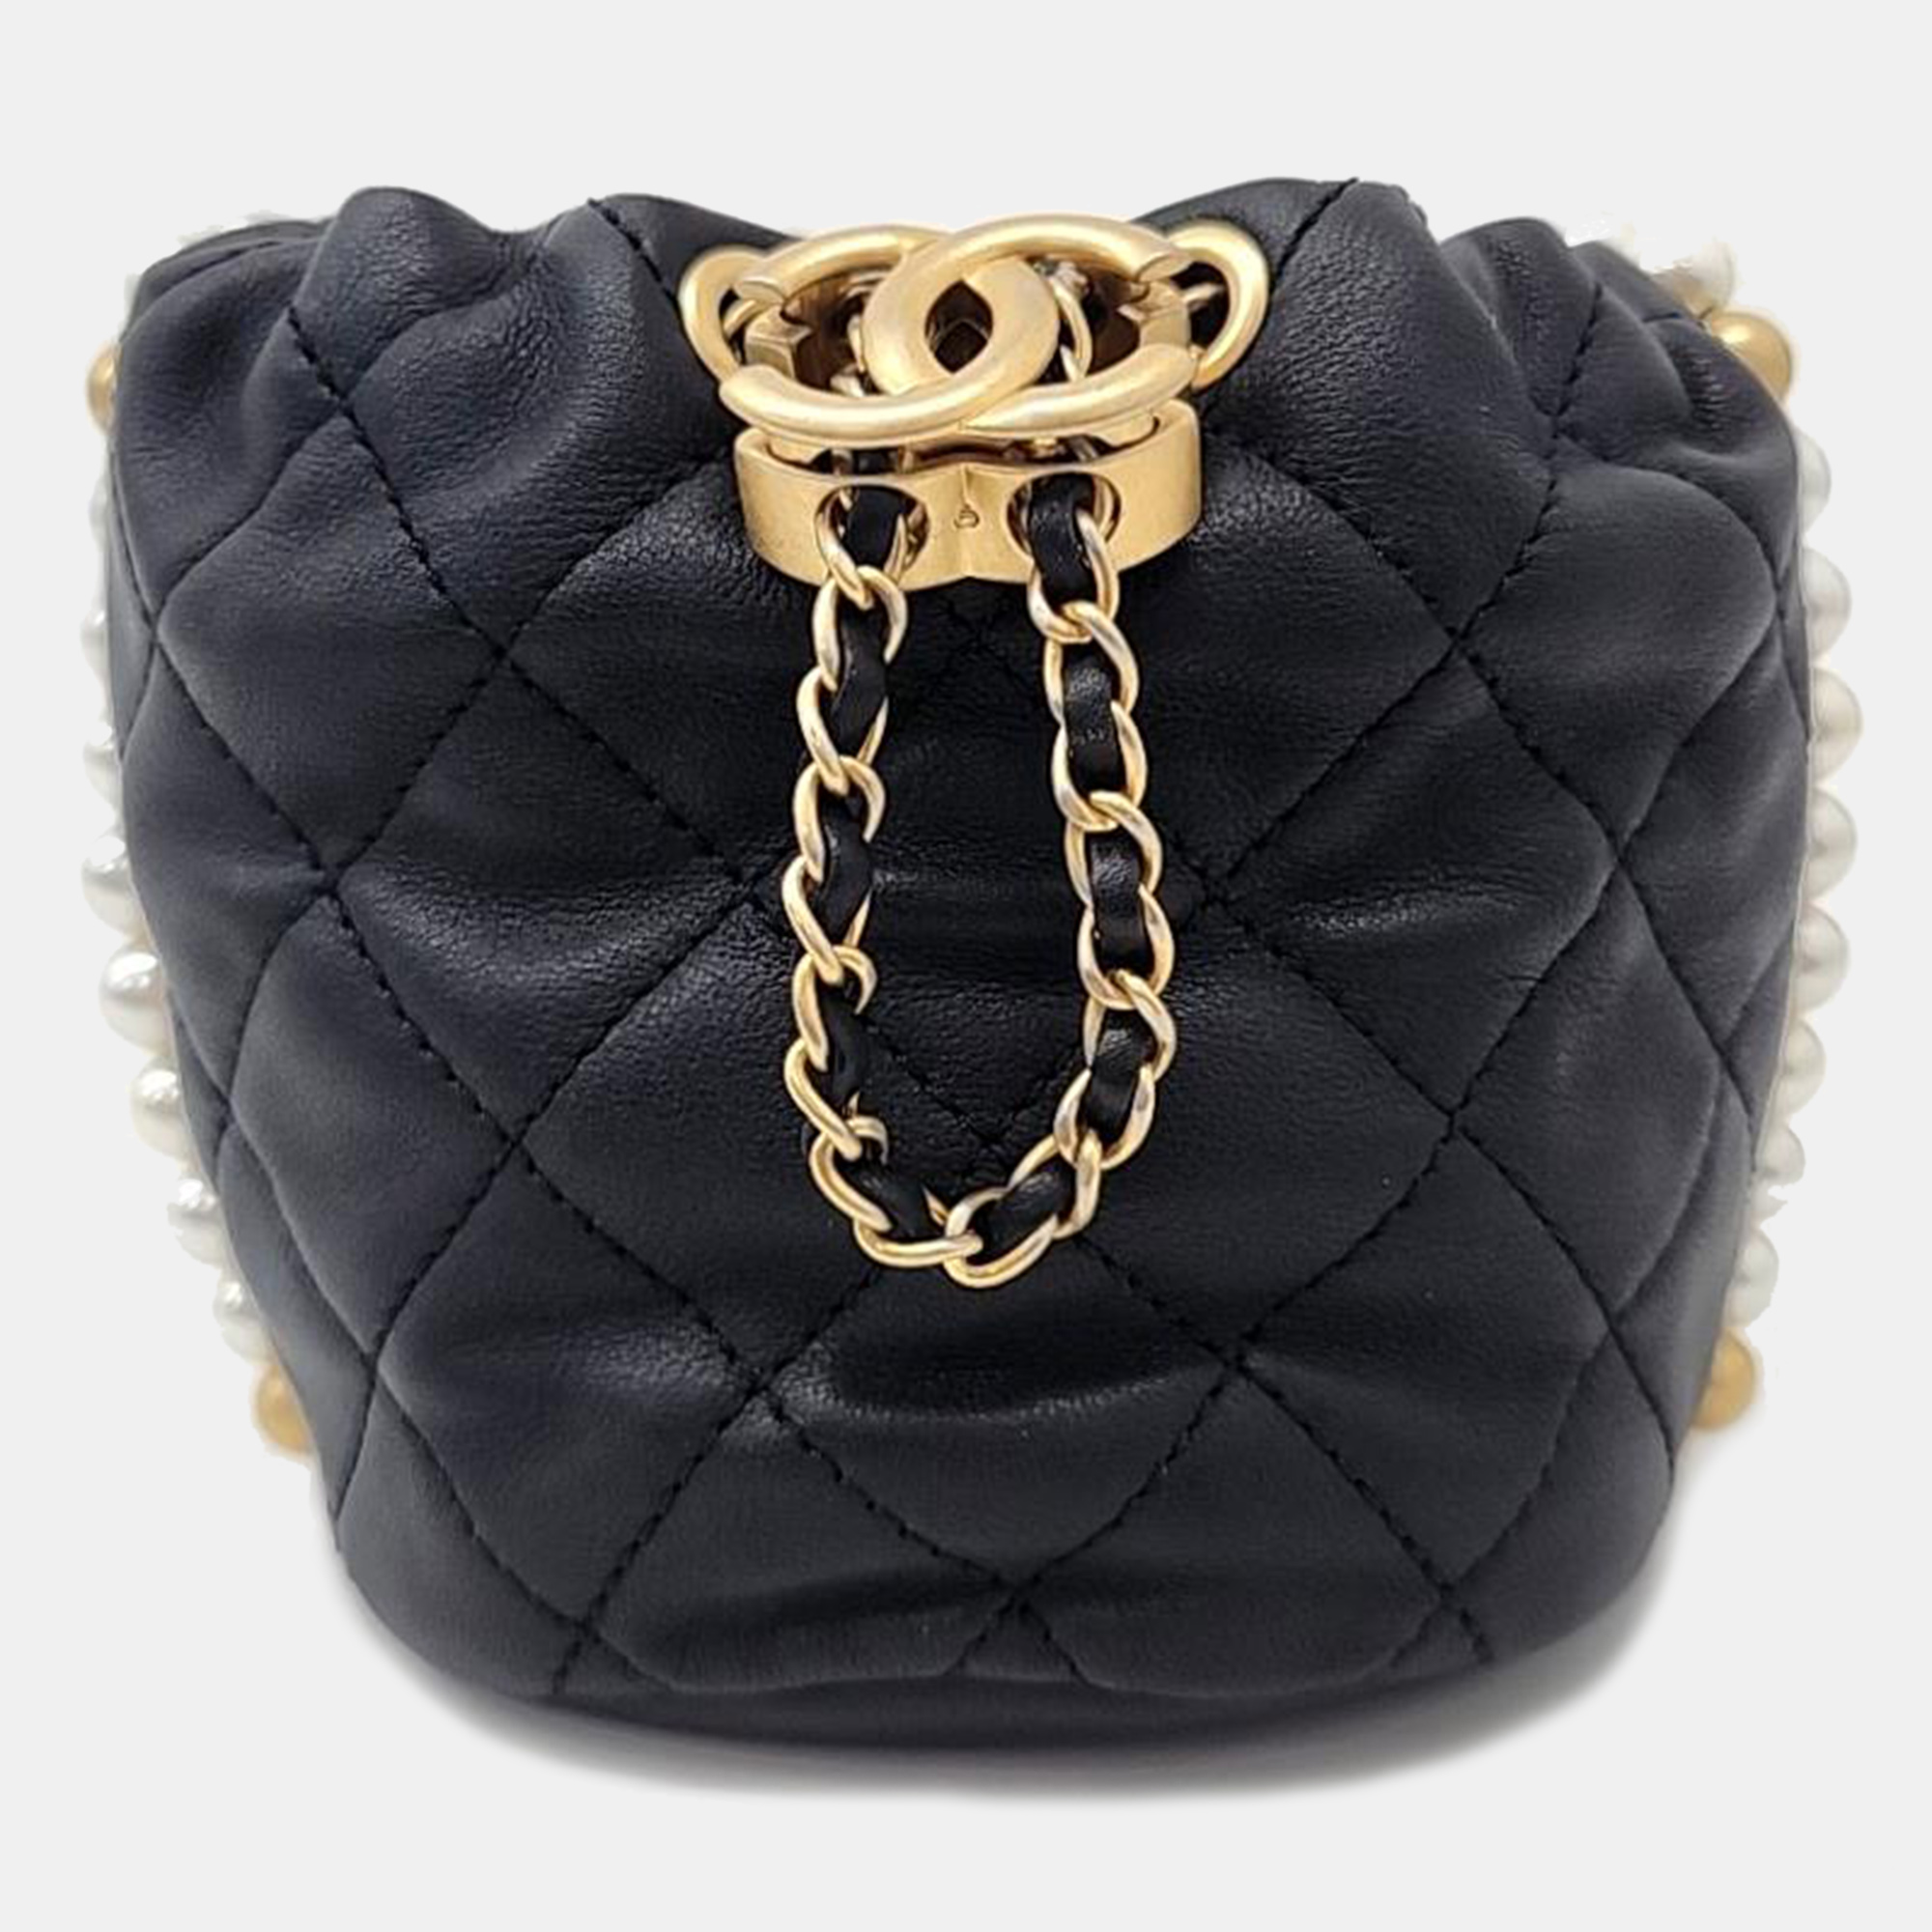 Chanel black leather mini about pearls drawstring bucket bag